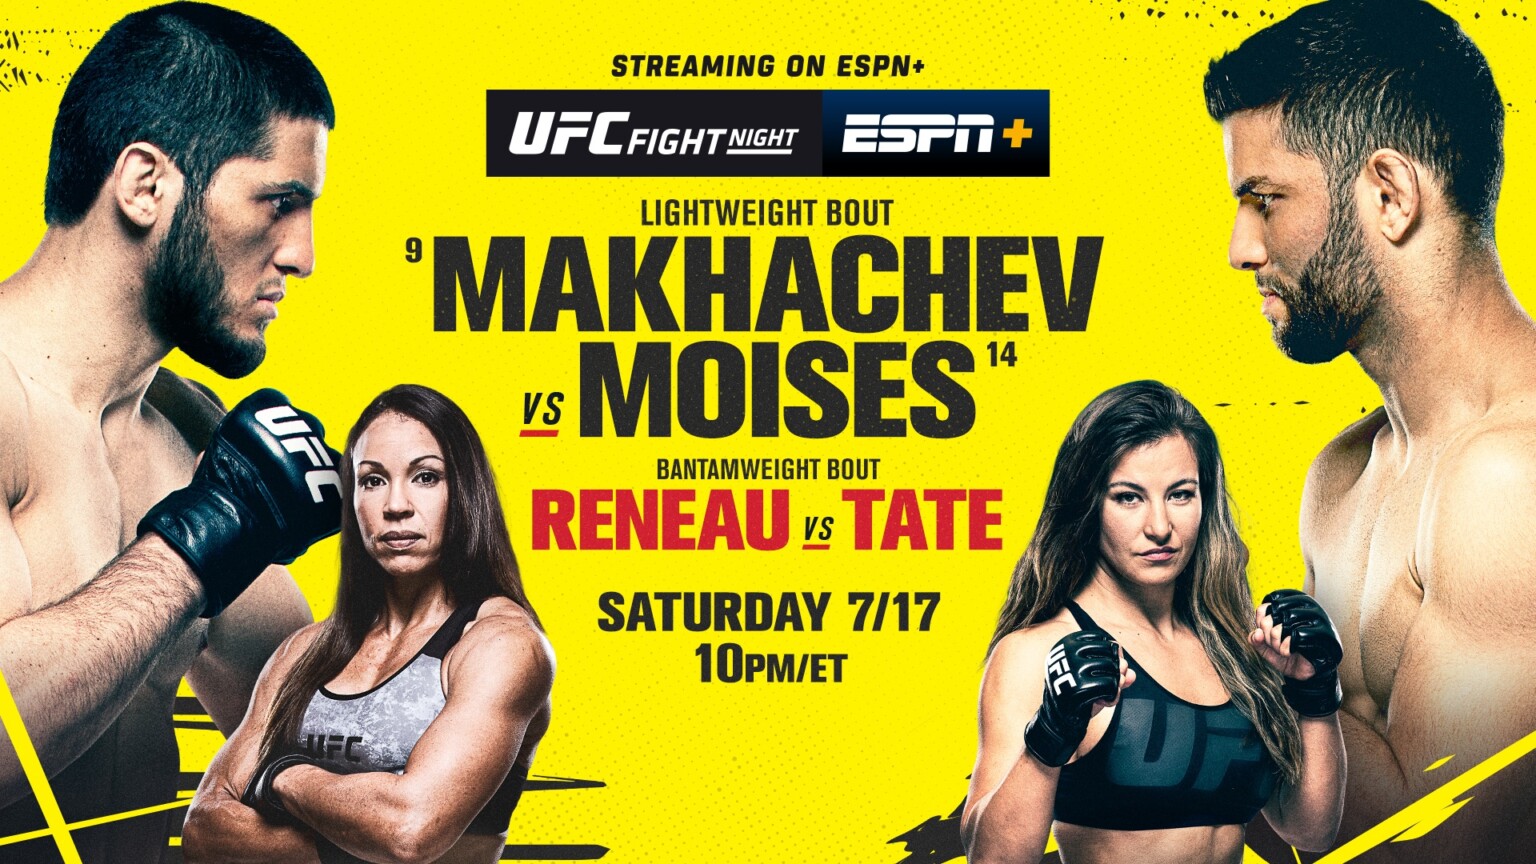 How to Watch UFC Fight Night: Makhachev vs. Moises Online – Live Stream